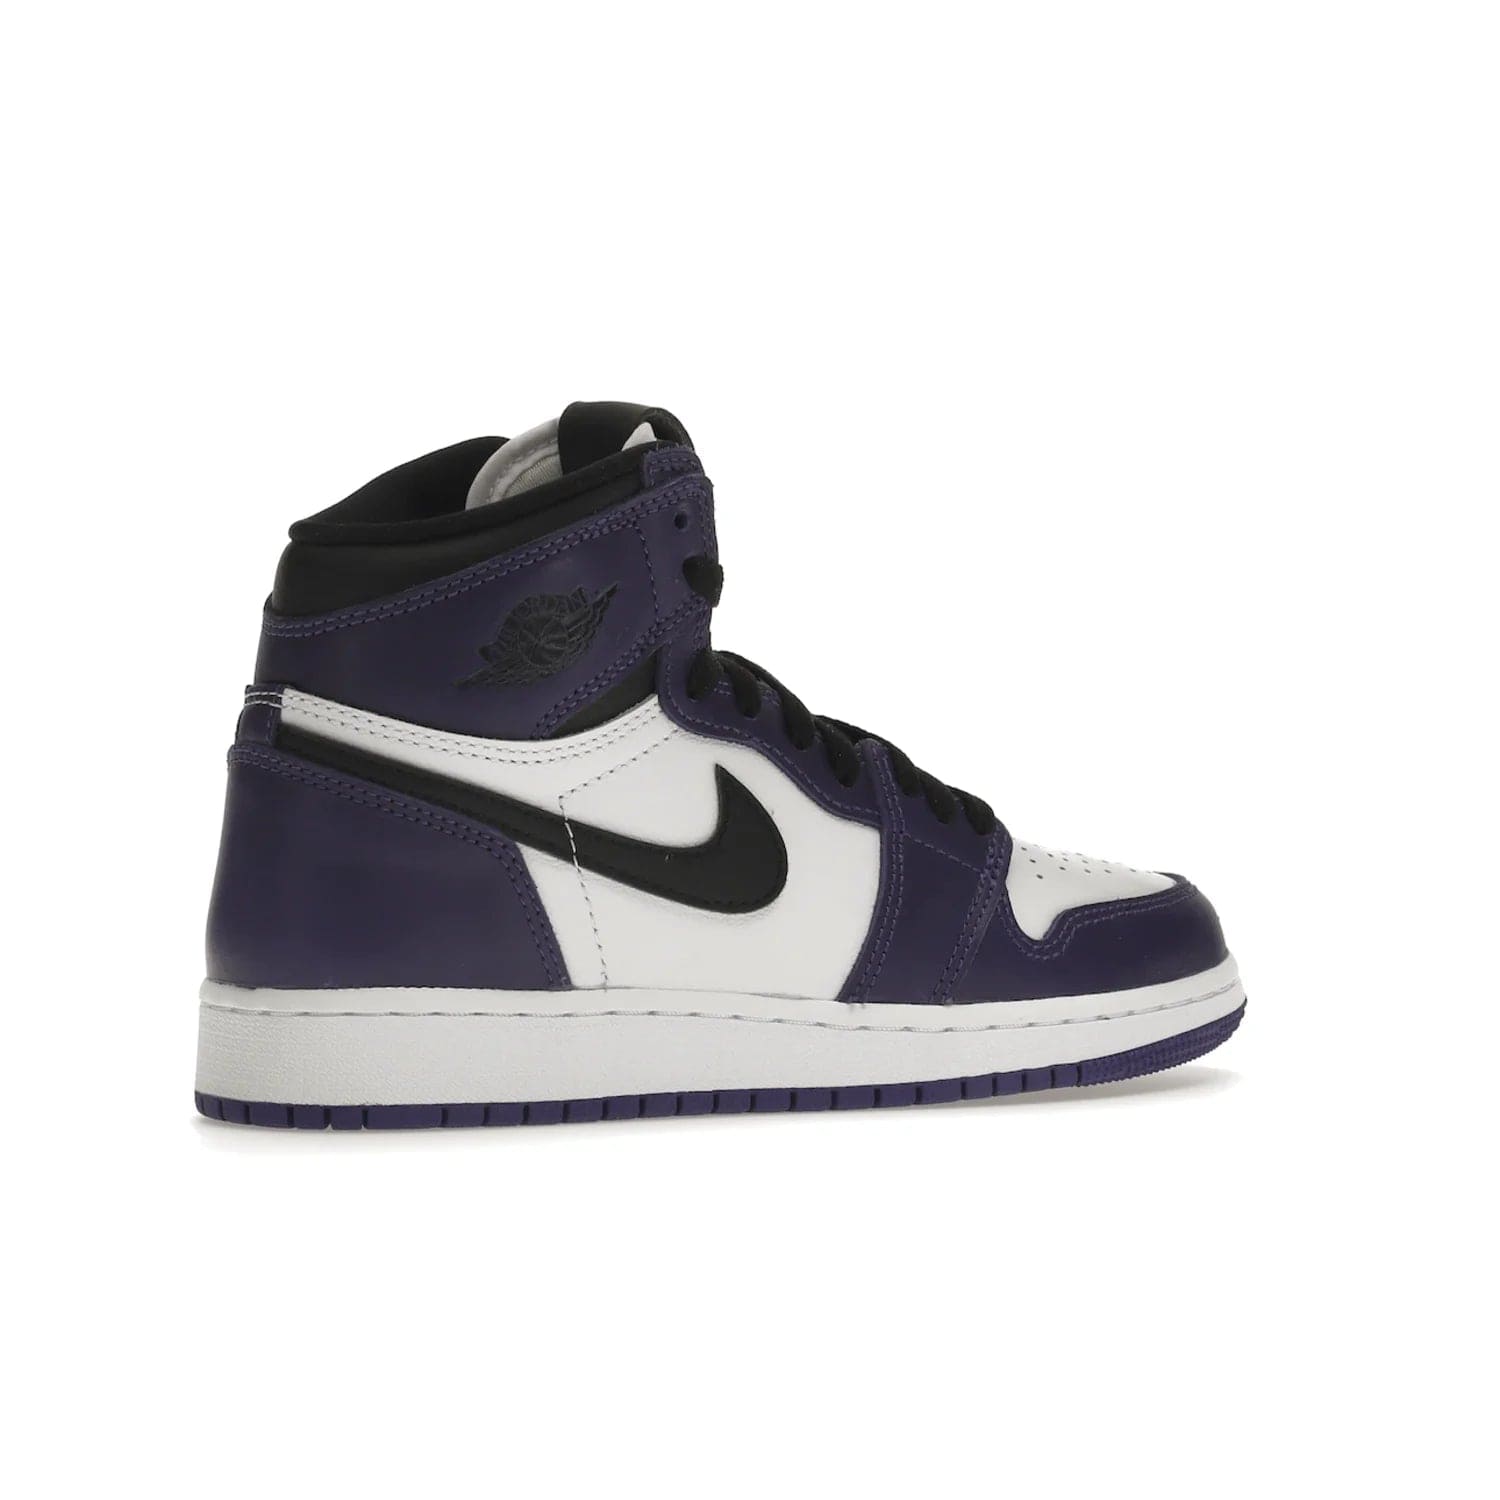 Jordan 1 Retro High Court Purple White (GS) - Image 34 - Only at www.BallersClubKickz.com - The Air Jordan 1 Retro High Court Purple is here and young sneaker heads can show off classic style. Features a white tumbled leather upper, black swoosh, purple overlays, black collar with purple overlay, white tongue, black patch with purple Nike Air logo and swoosh, white midsole, and purple rubber outsole with circular pattern.